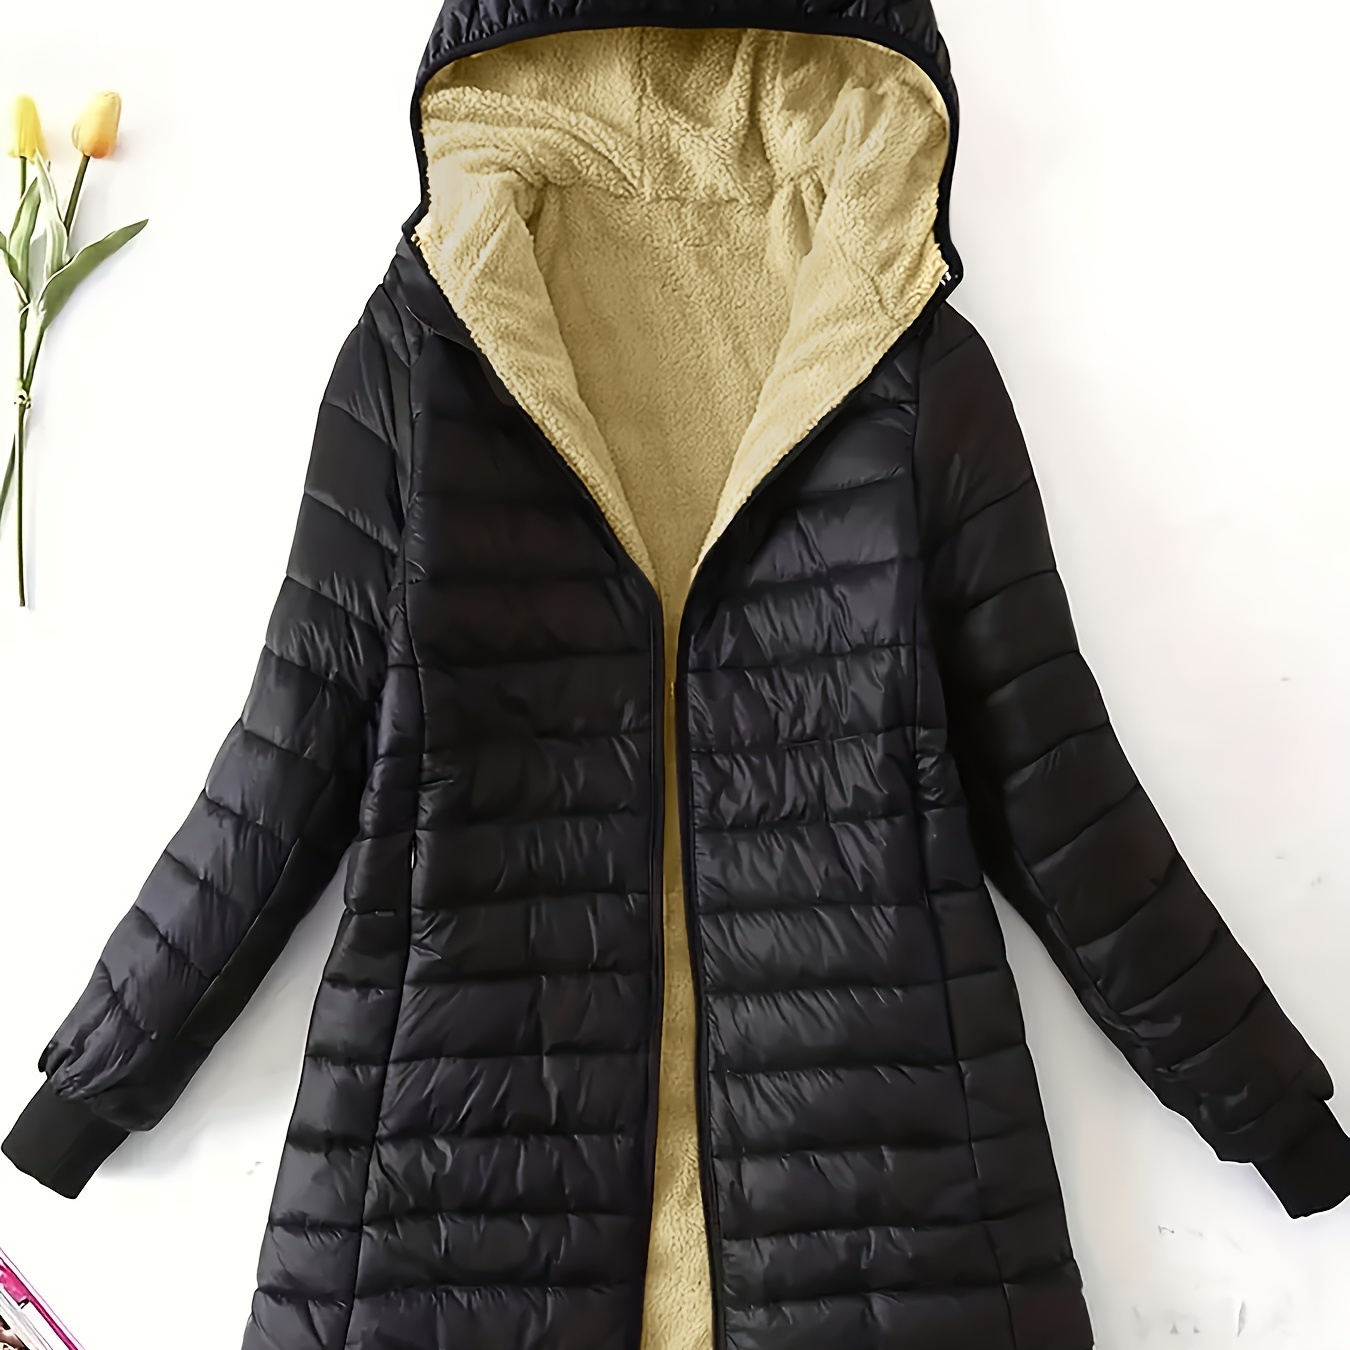 

Zip-up Puffy Hooded Coat, Casual Thermal Long Sleeve Coat For Fall & Winter, Women's Clothing